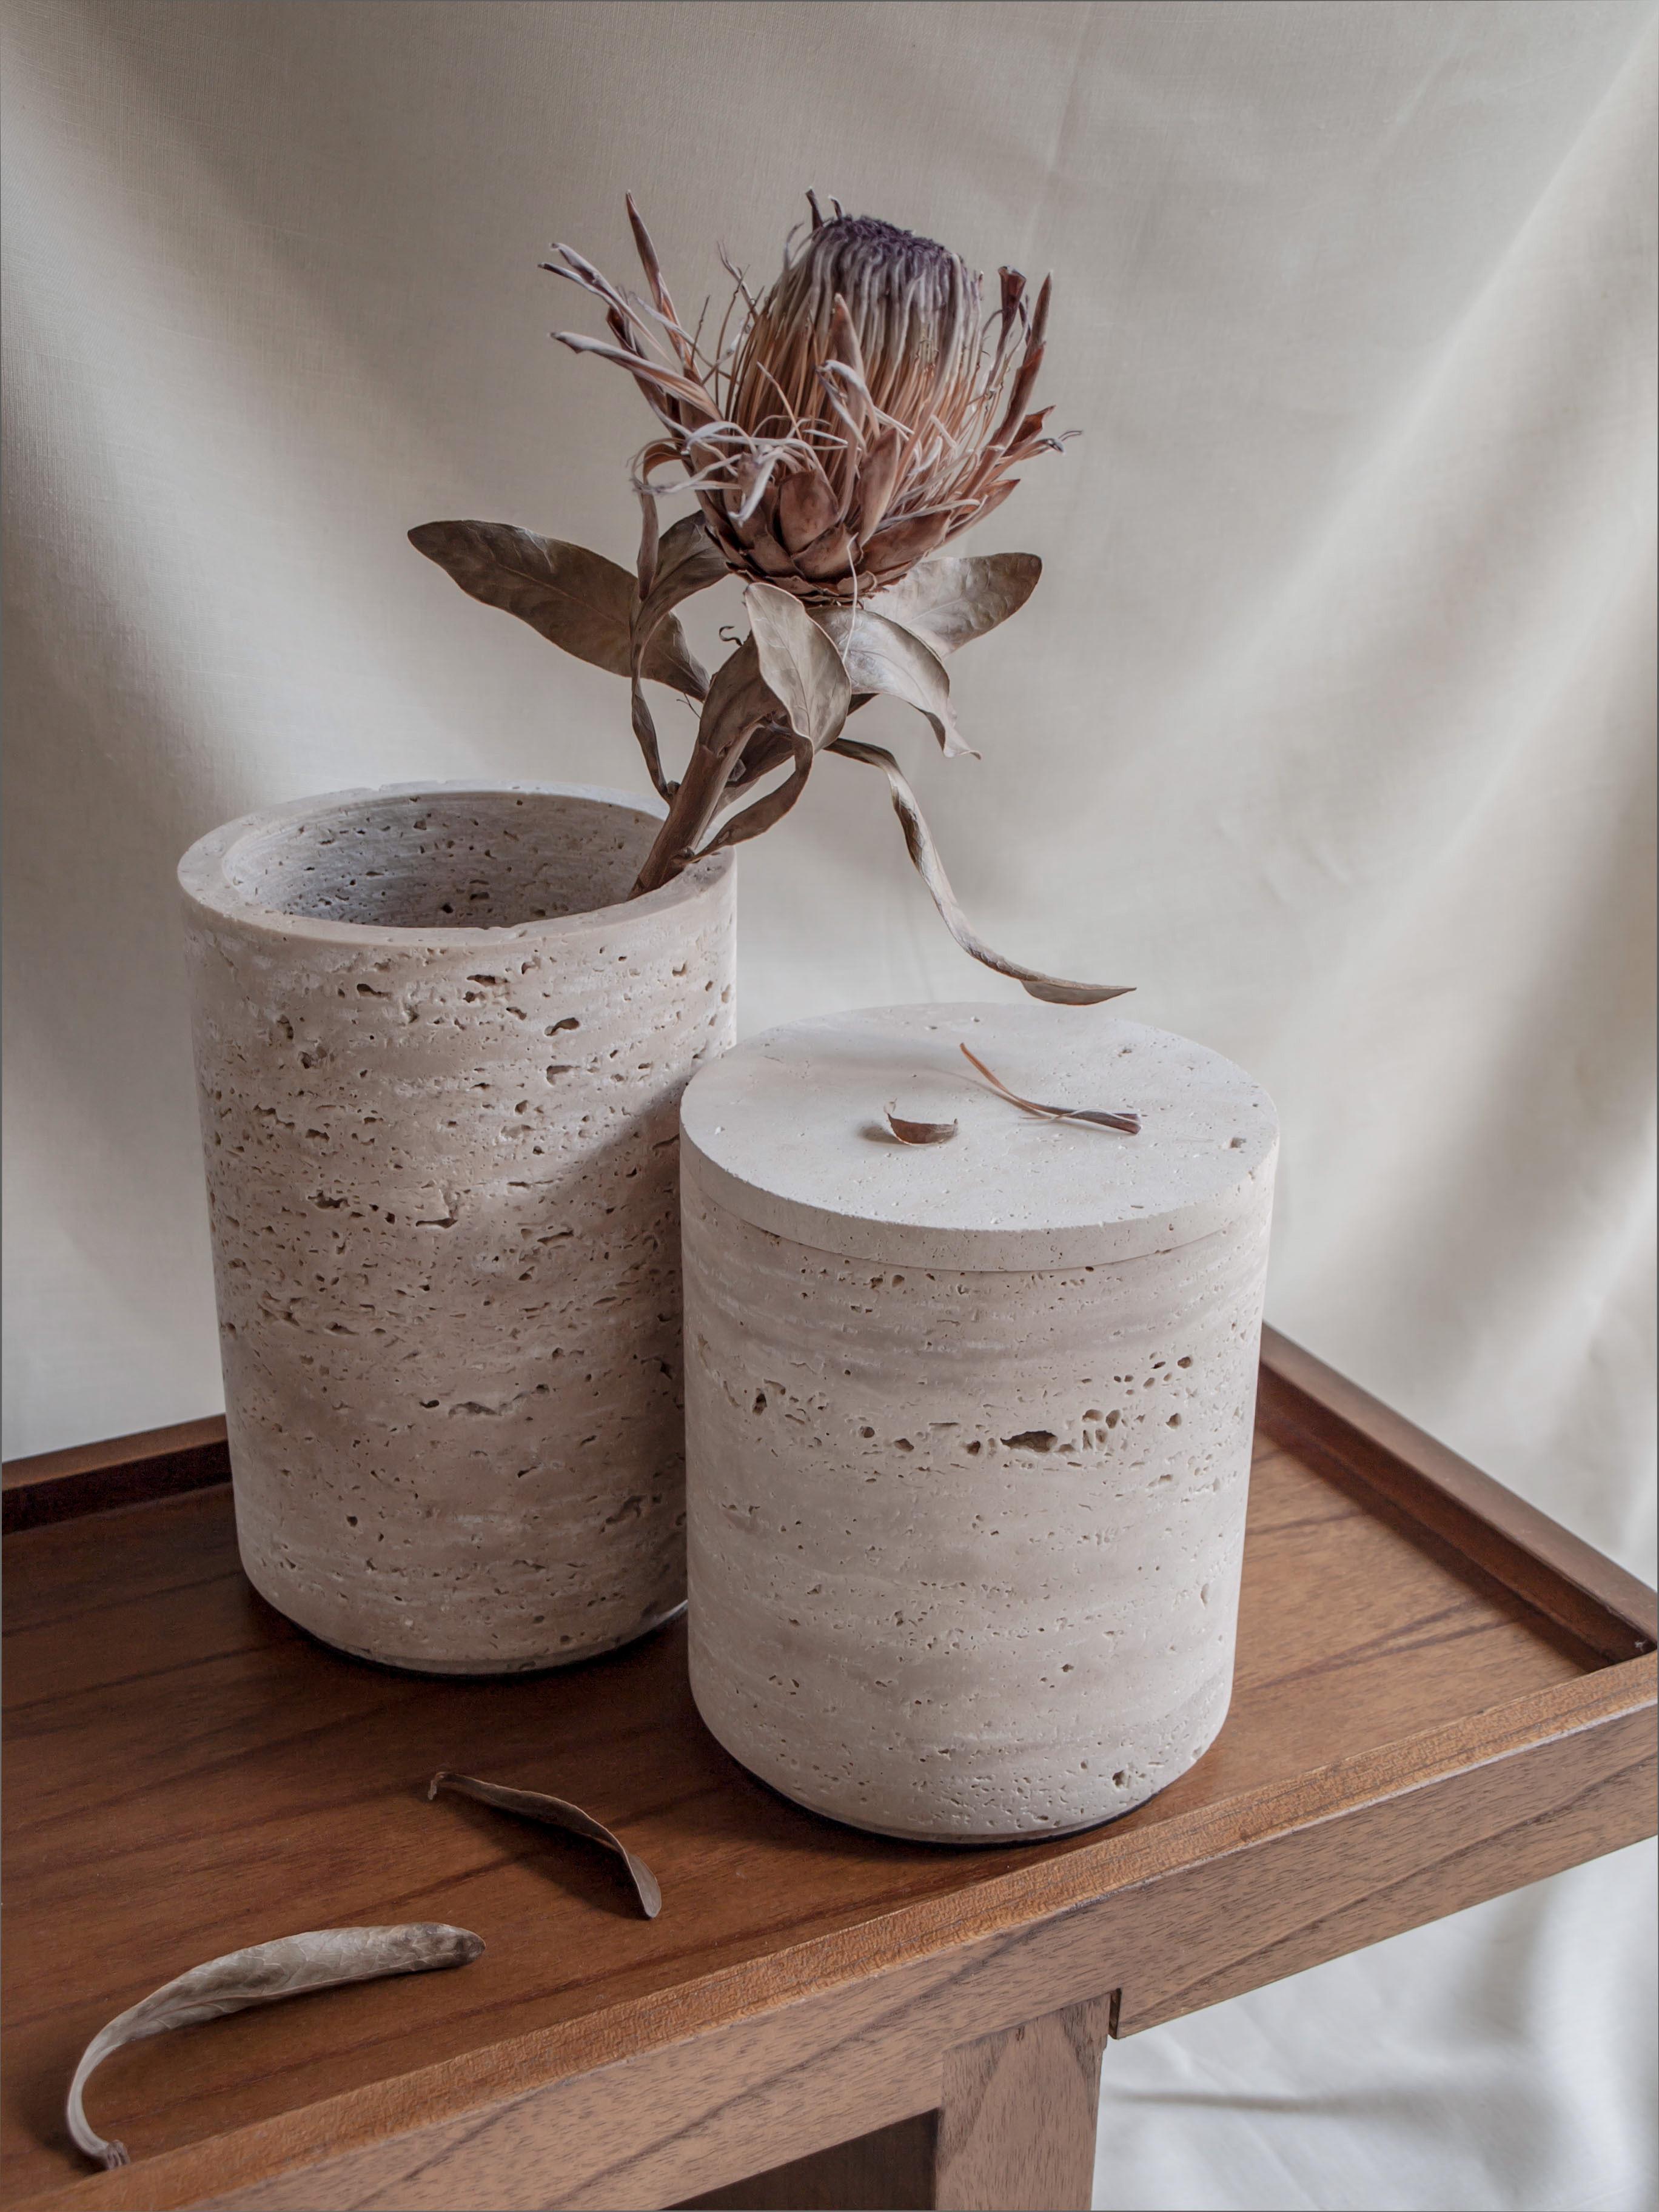 High Travertino Light Vase
Dimensions: Diameter 21cm x height 16cm
Materials: Travertino marble. Light Vein. 
Technique: Hand-crafted, natural finished. 

Designer's Biography: 

Bicci de’ Medici manufactures exclusive design pieces, formed by hand,